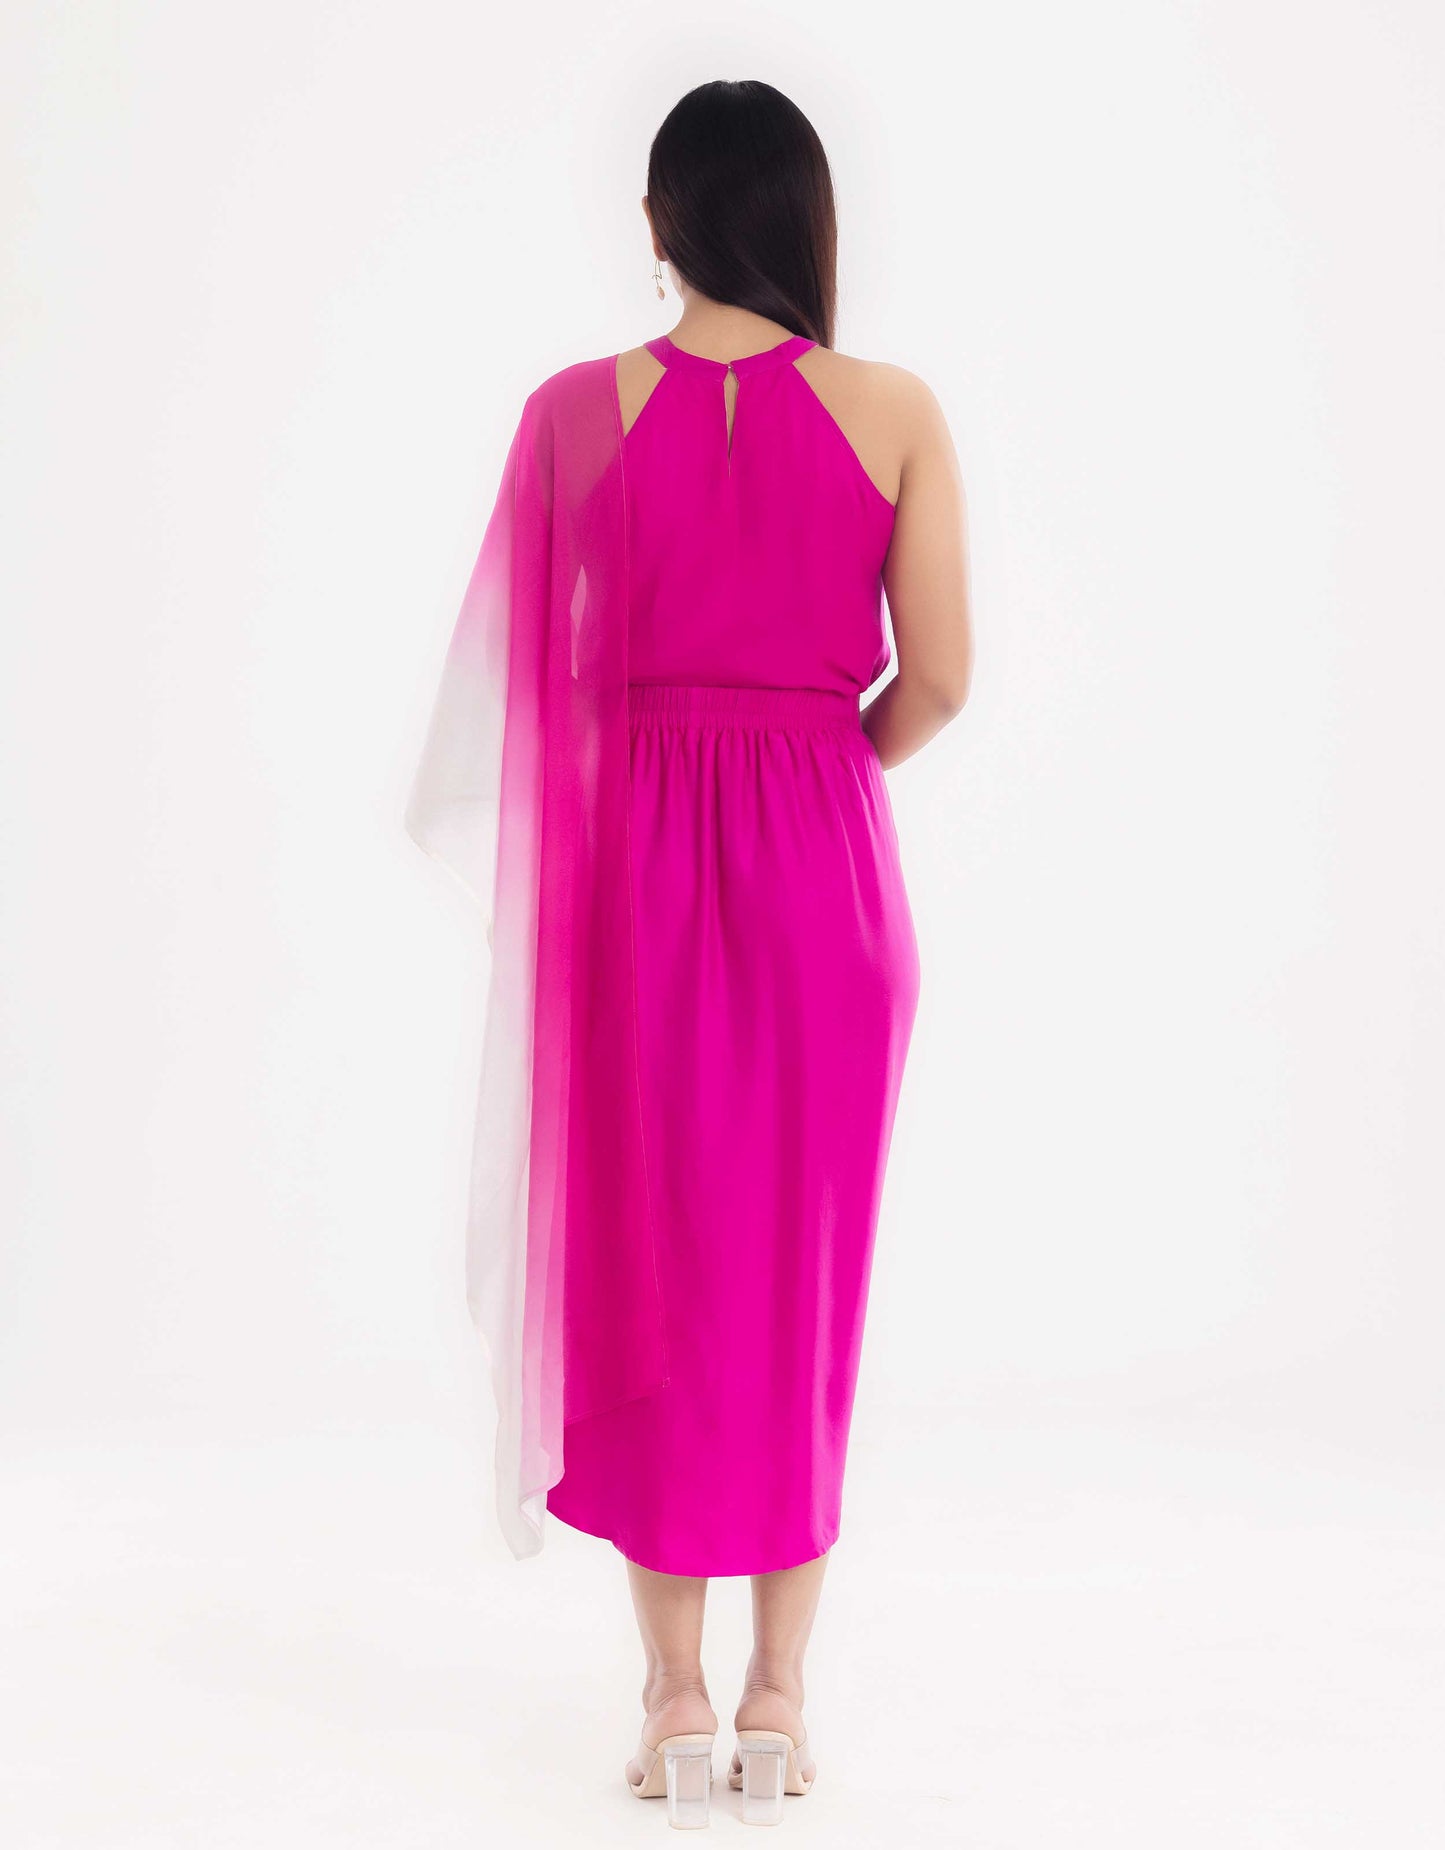 Hueloom pink Allure convertible capsule with top and skirt back view display.